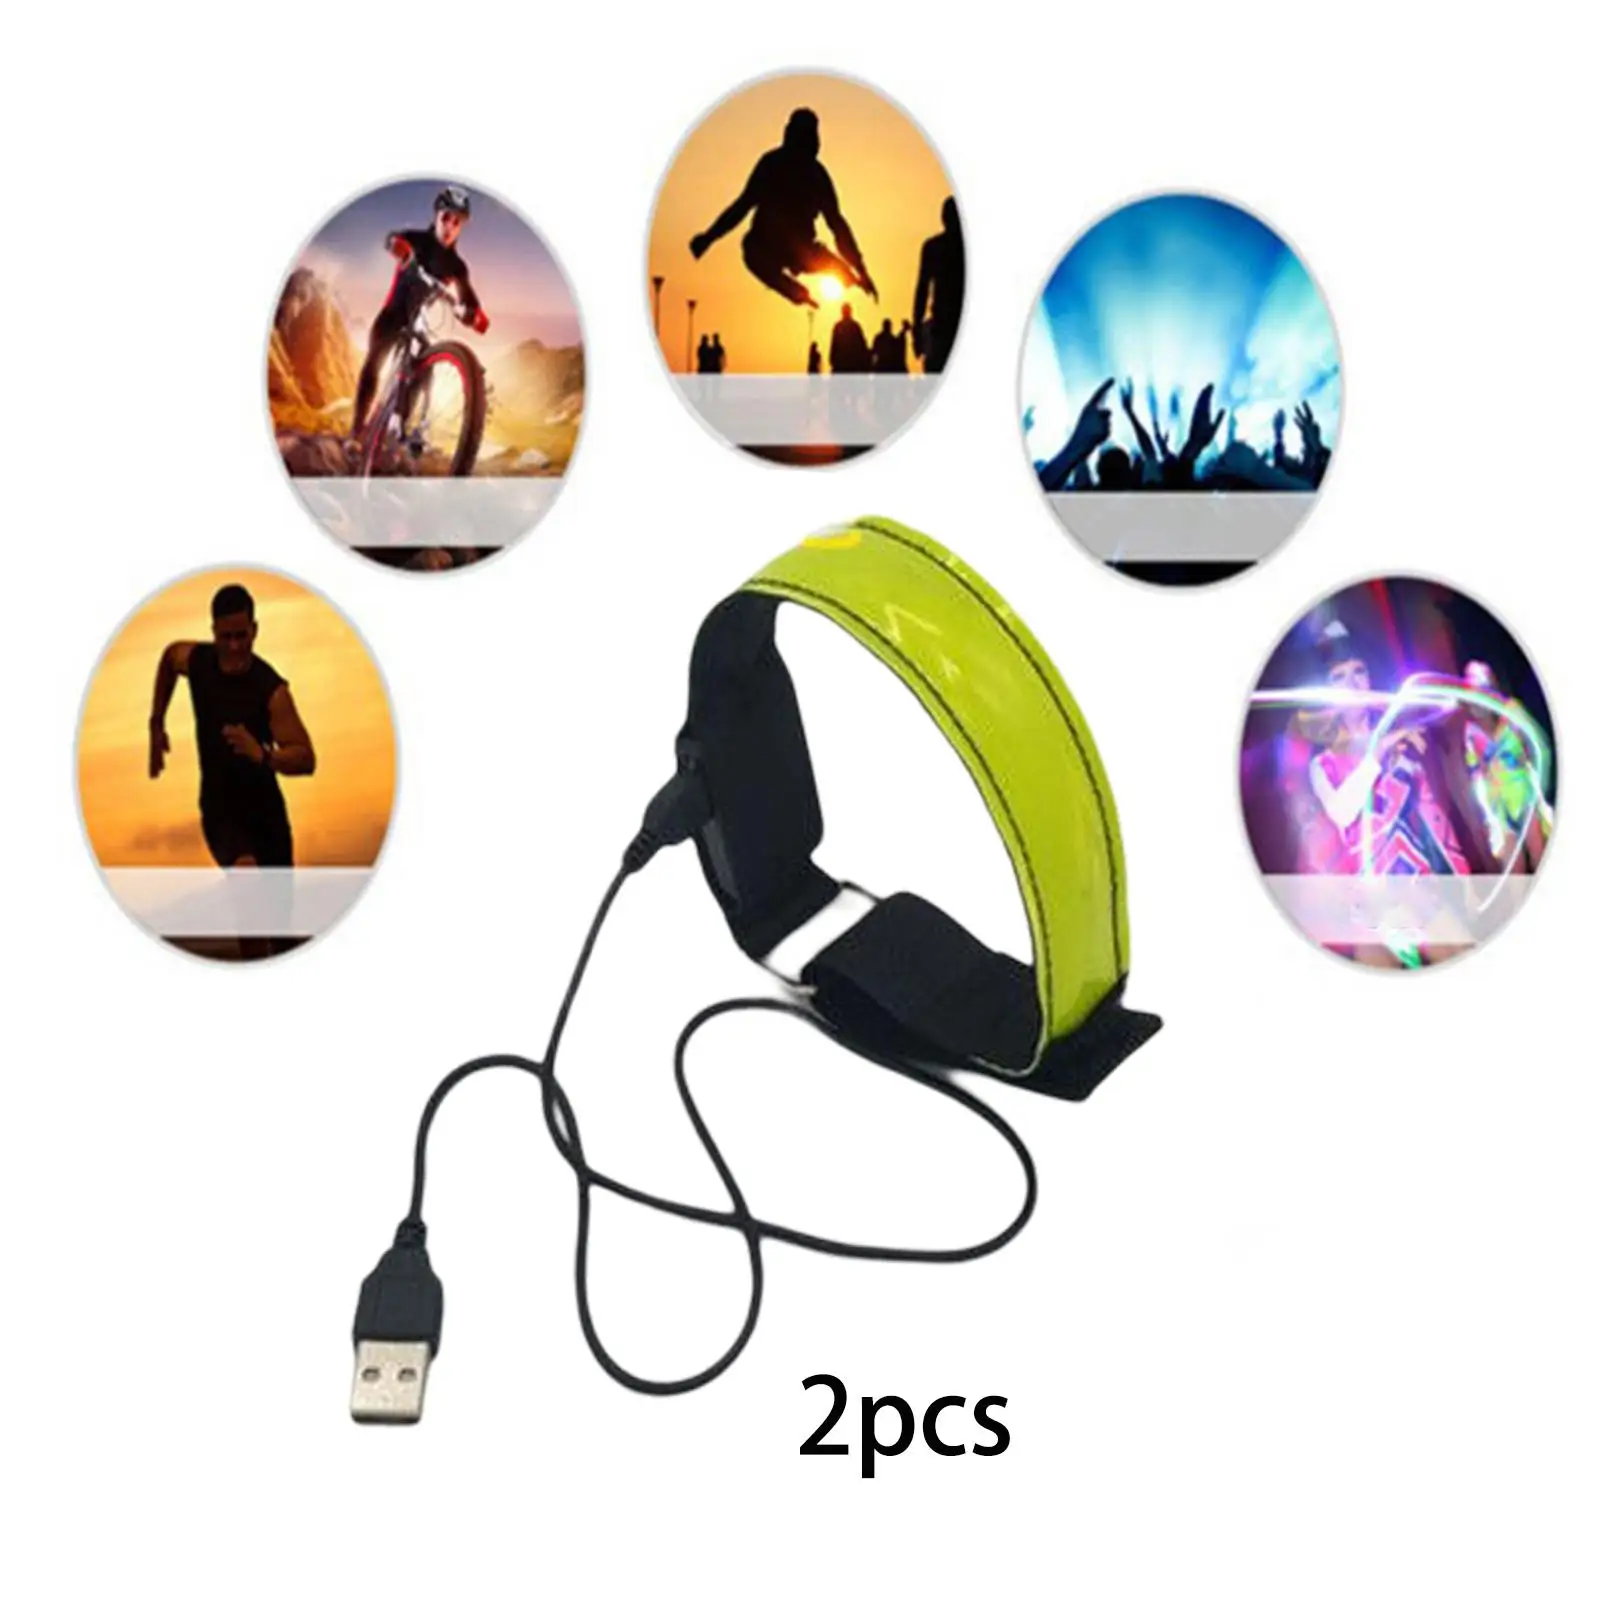 2Pcs USB Rechargeable LED Armbands High Visibility Arm Bands Runners Accessories Safety Light up Band for Running Jogging Hiking